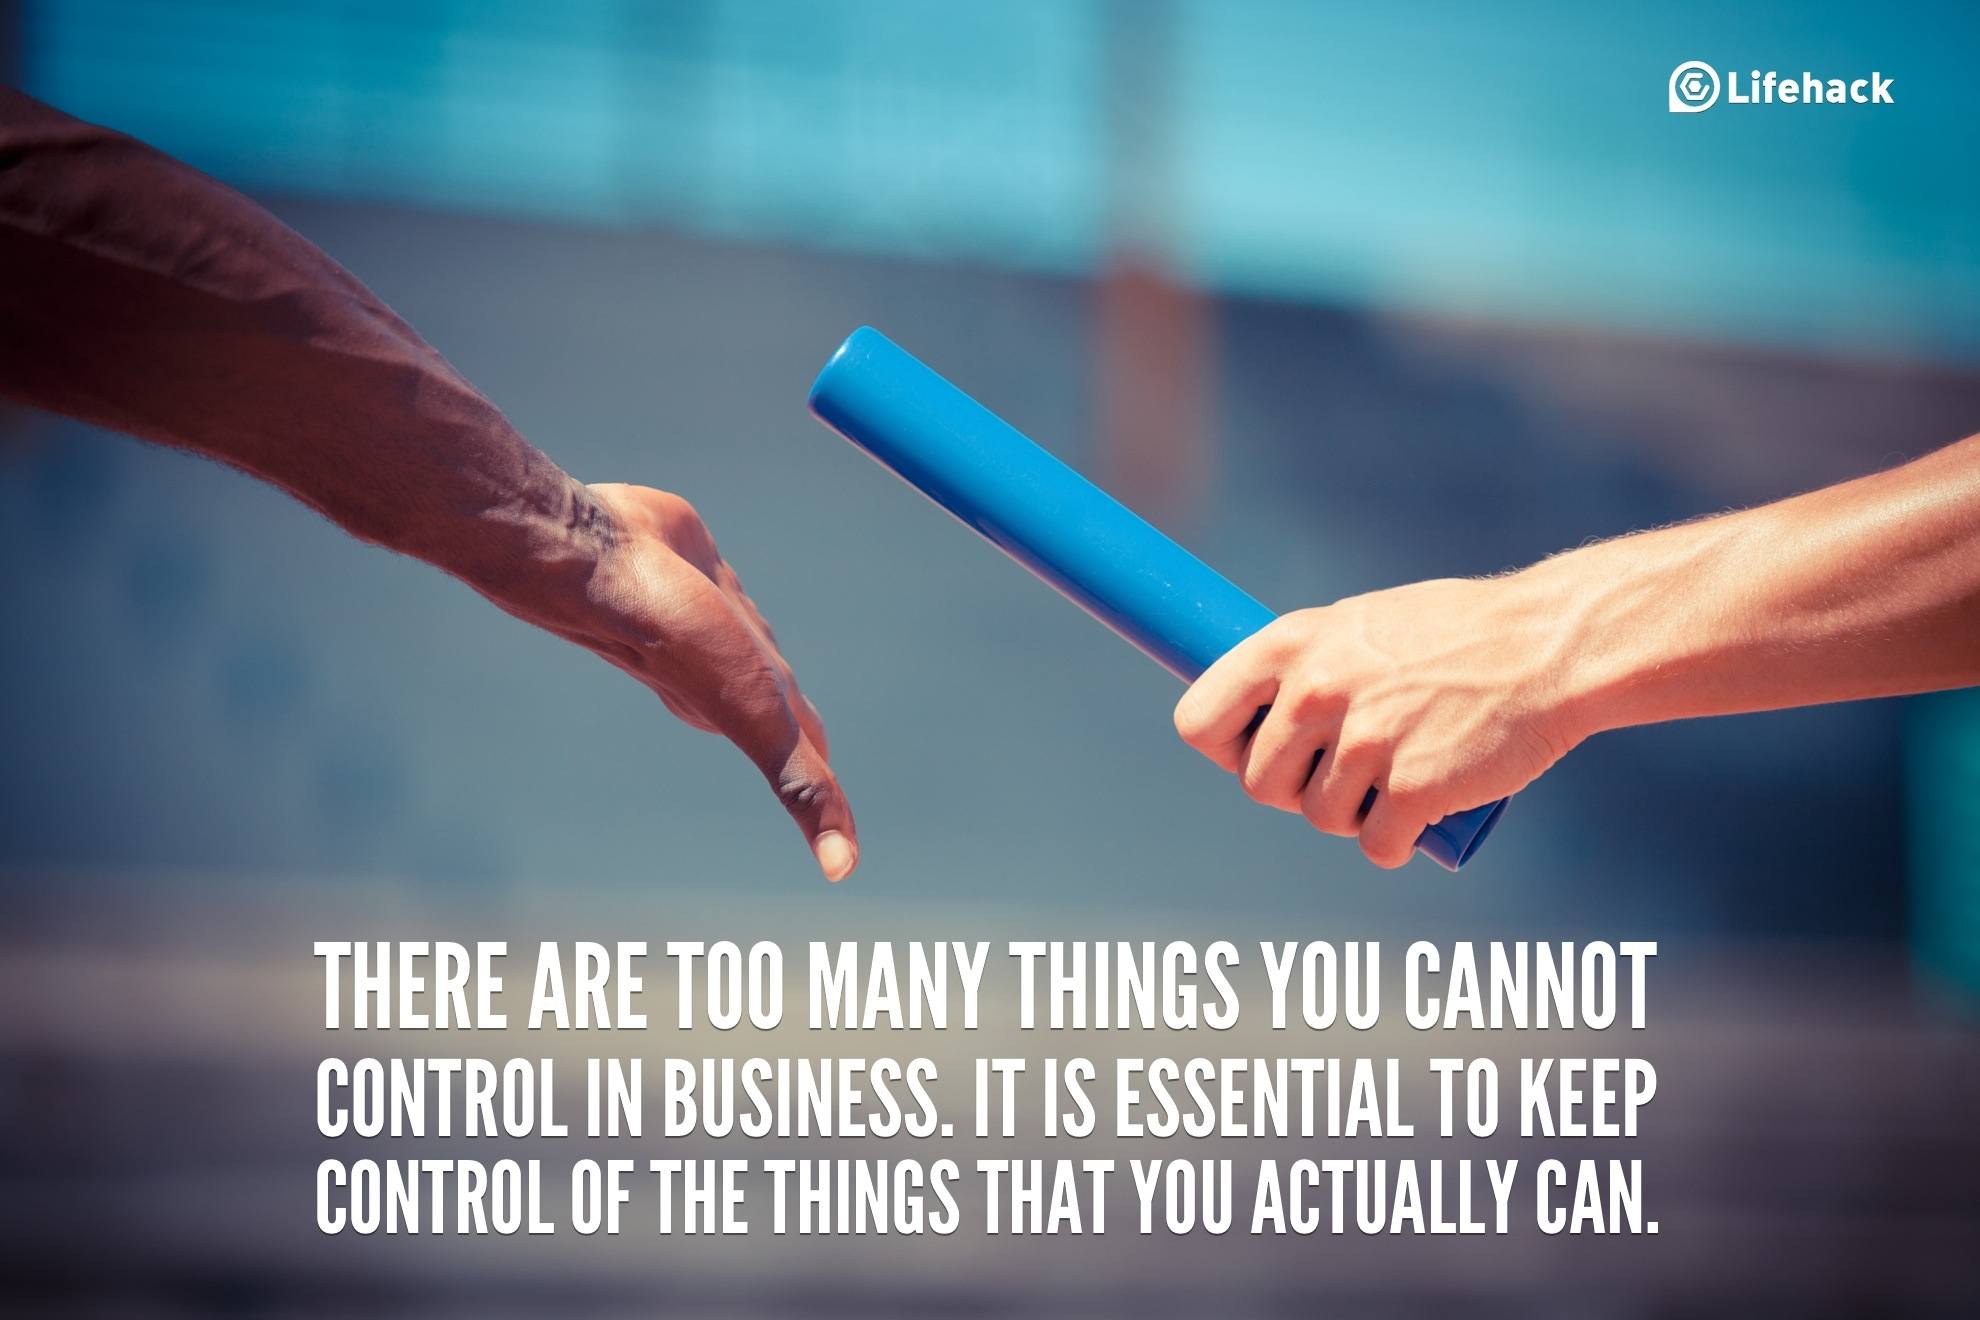 30sec Tip: Do You Control Too Many Things?